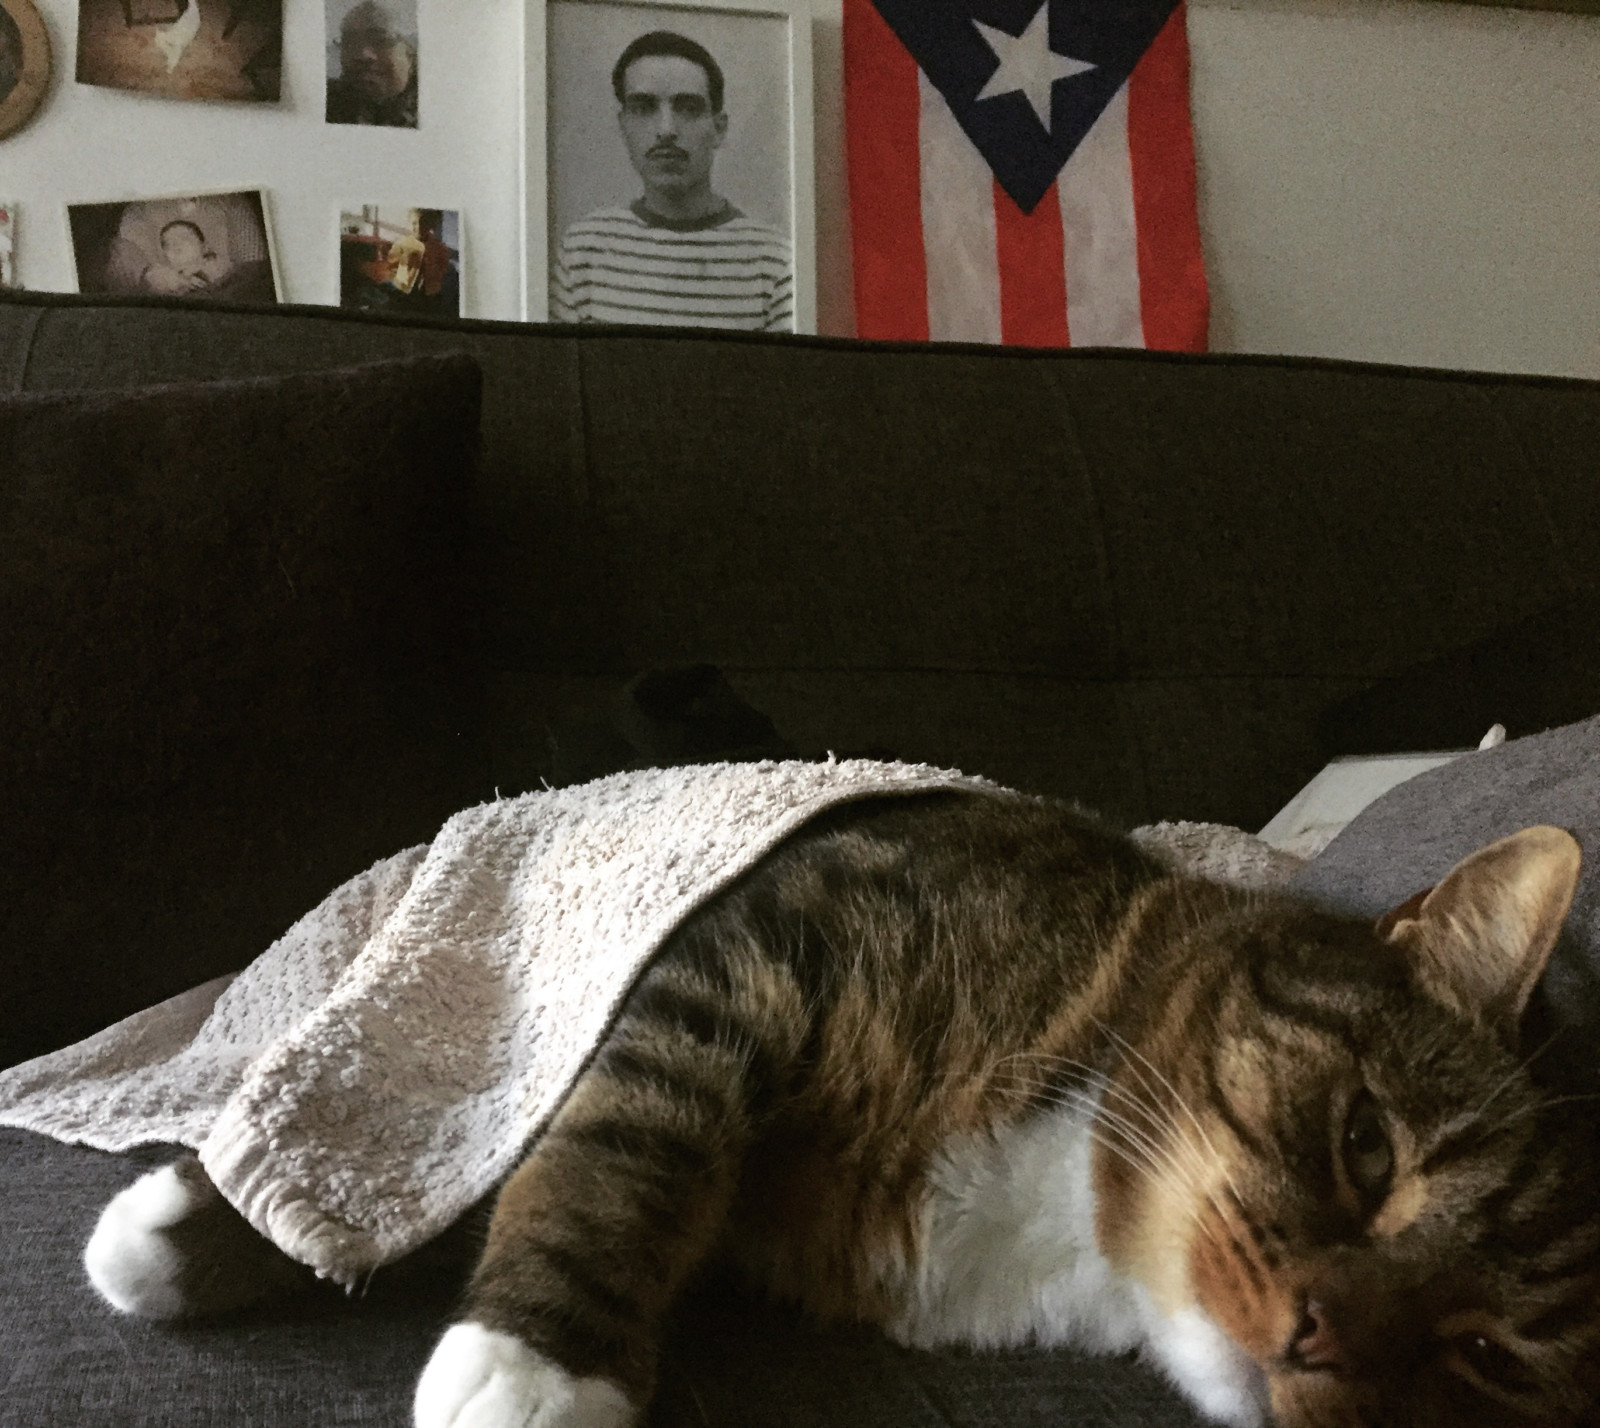 A cat is lying on its side, looking at the camera with eyes slightly open and a towel over its back legs. In the background is the flag of Cuba and a black and white portrait photograph of a man with a moustache.